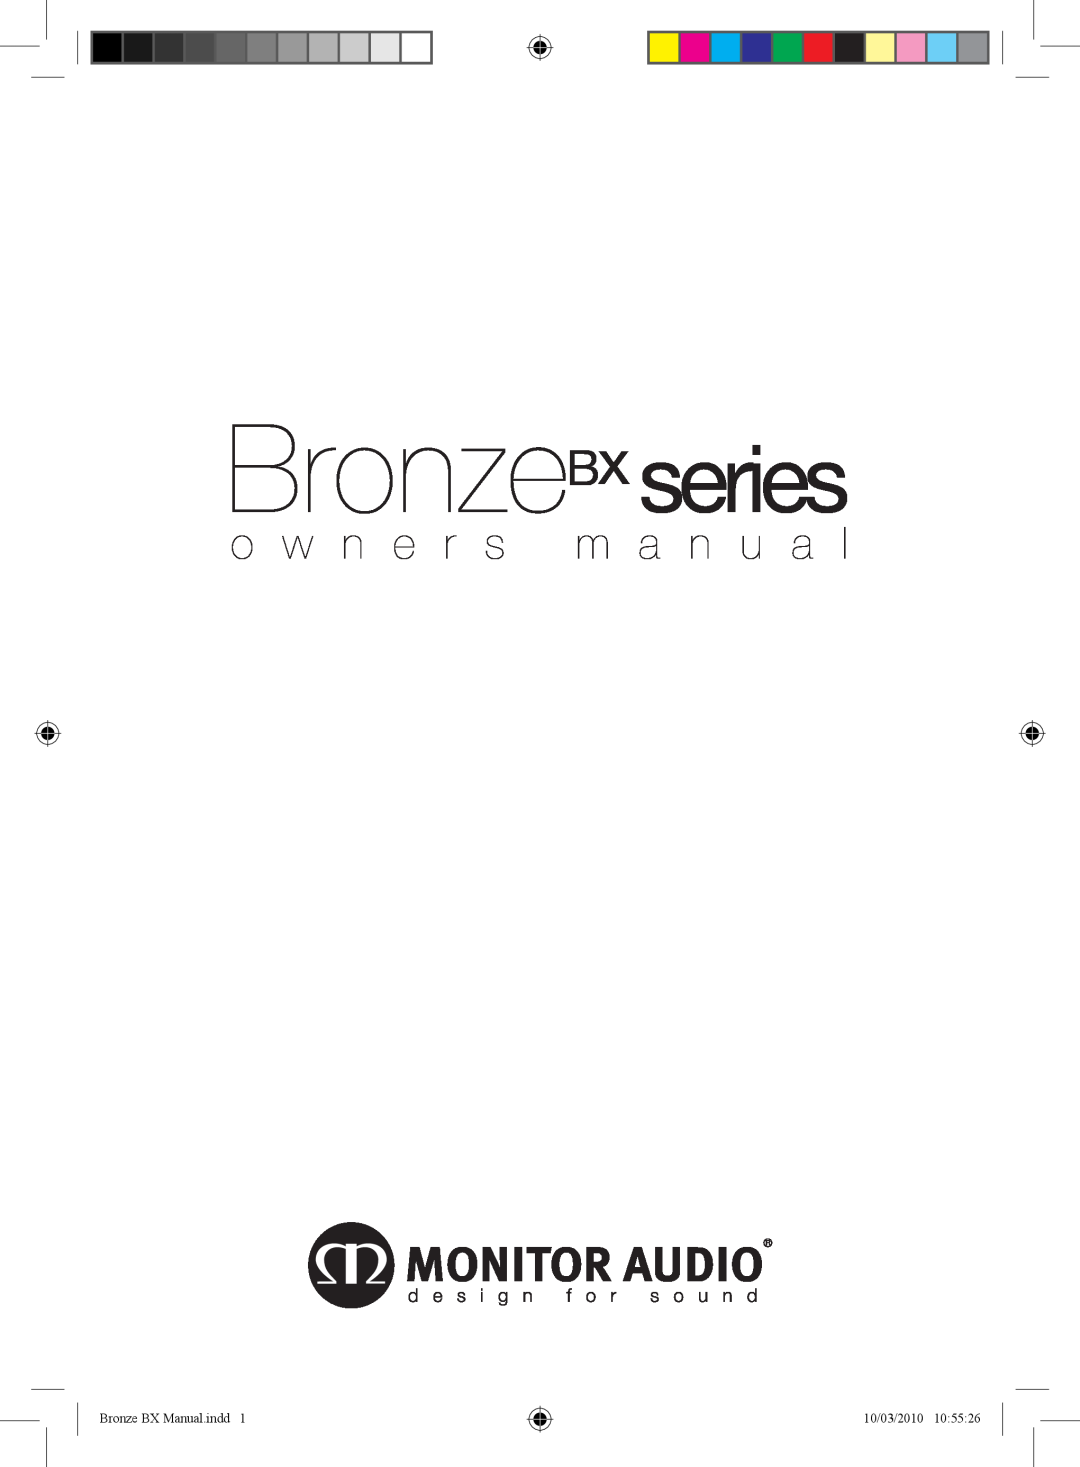 Monitor Audio BX Series owner manual BronzeBx series, o w n e r s m a n u a l, Bronze BX Manual.indd, 10/03/2010 10 